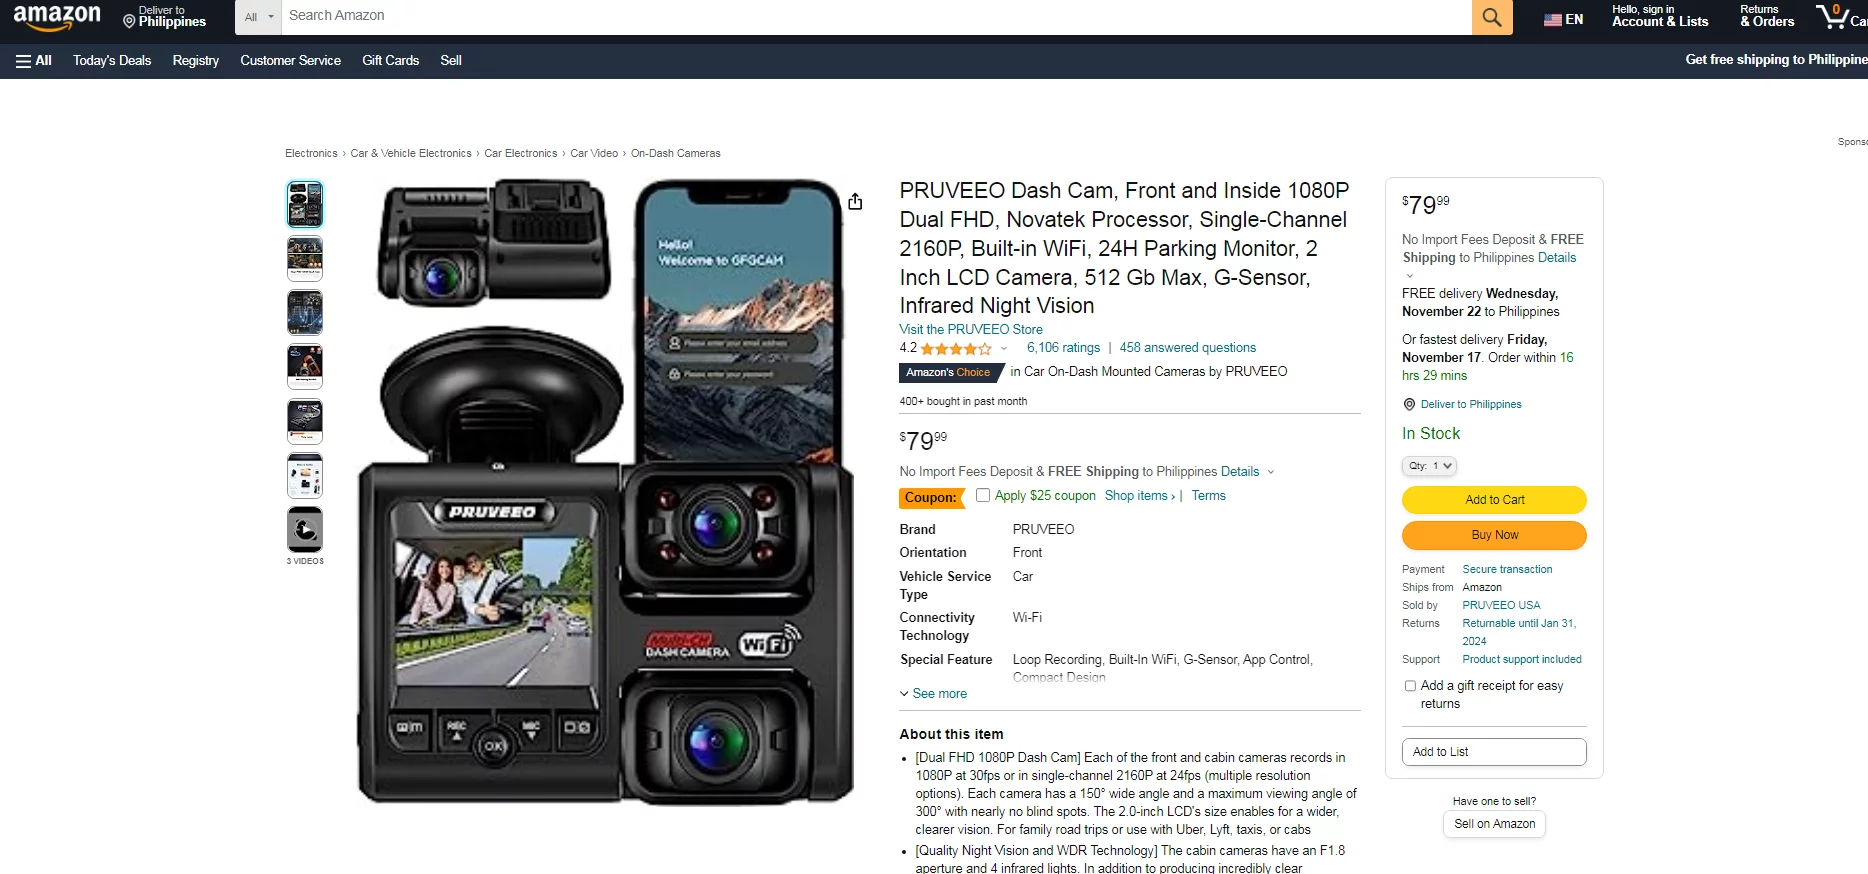 Best Dashcam and Accessories Dropshipping Suppliers 8: Pruveeo